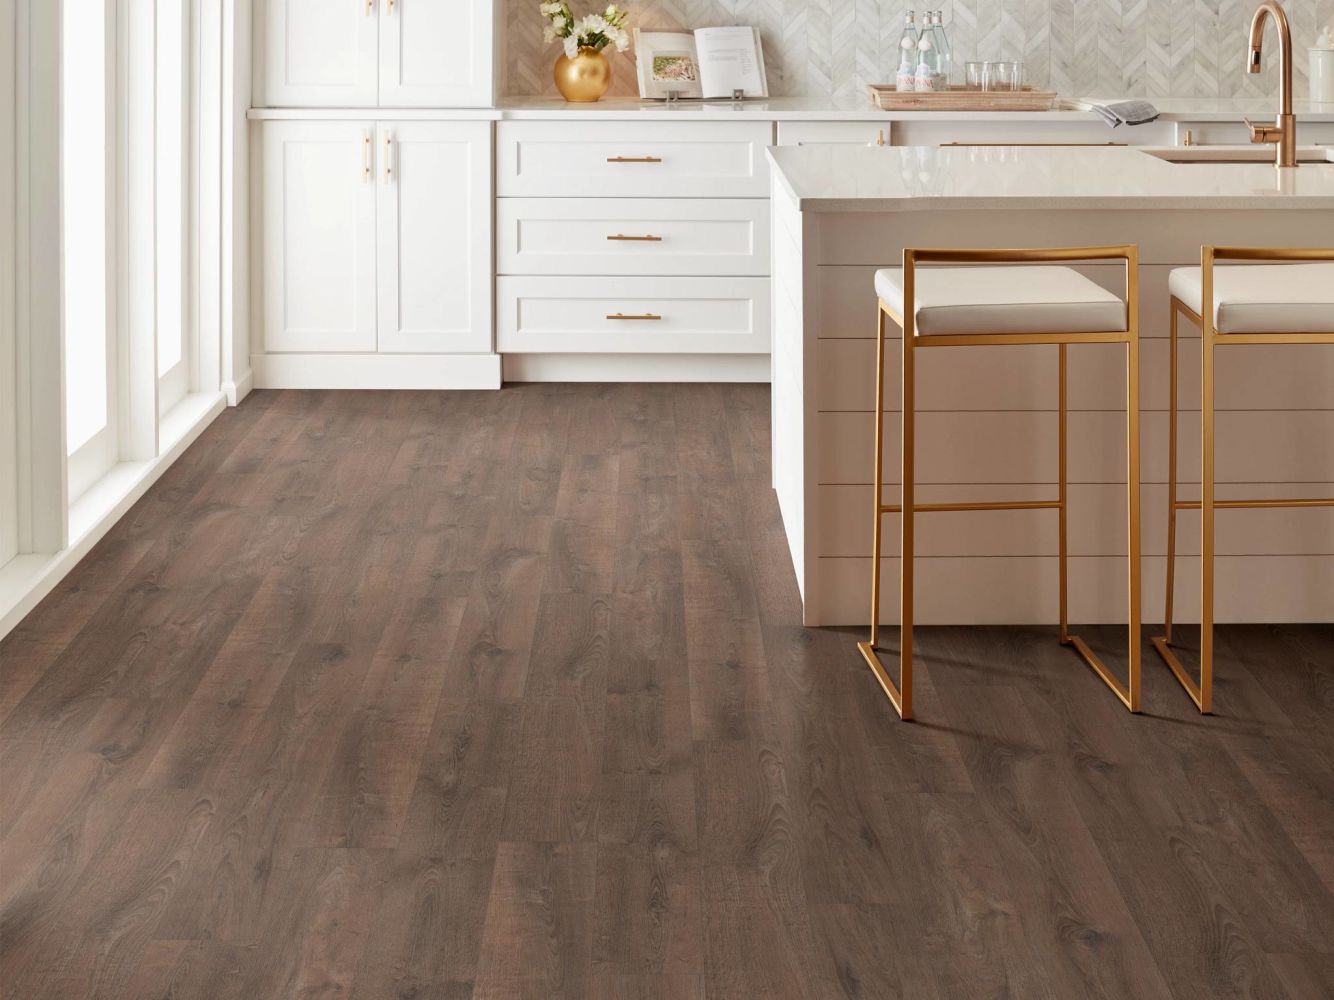 Shaw Floors Pulte Home Hard Surfaces Pebble Chase Big Fork Brown 07731_PW216